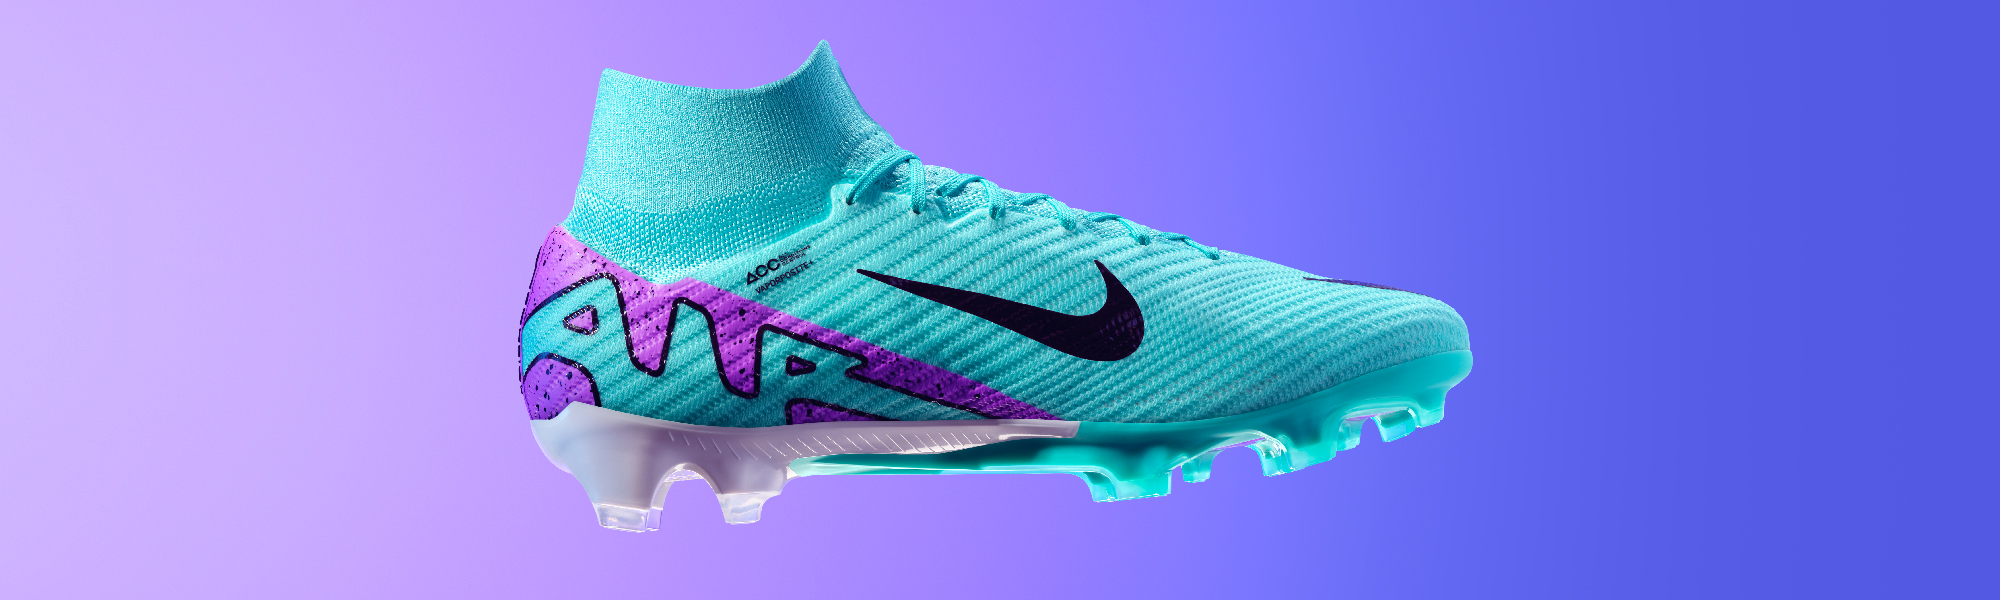 Custom Soccer Cleats to Play the Game in Style 